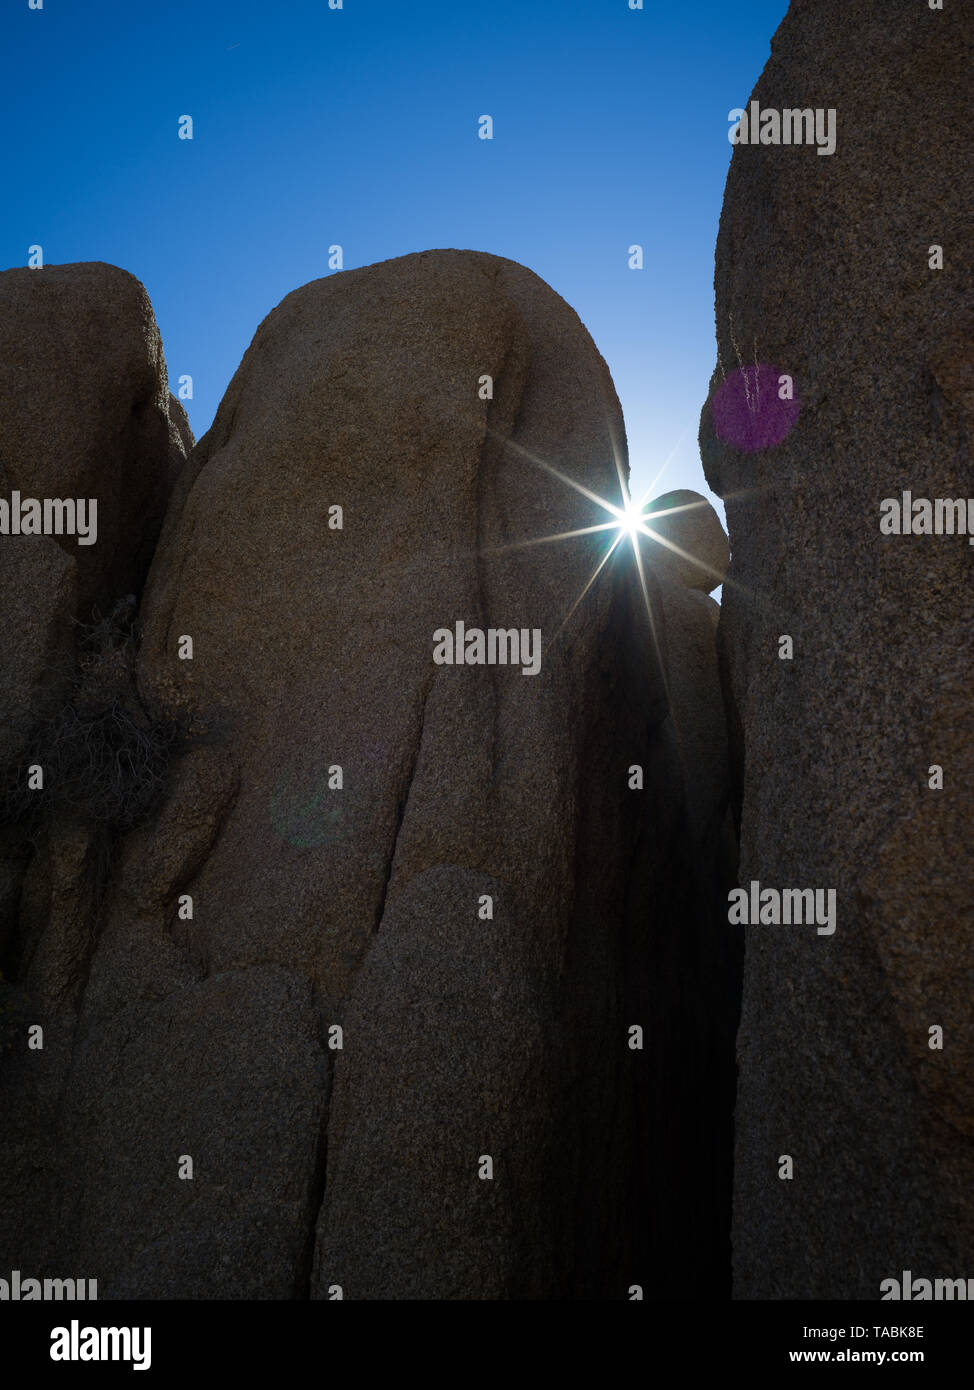 Low angle view of large boulder formations against a blue sky in Joshua Tree National Park. Stock Photo